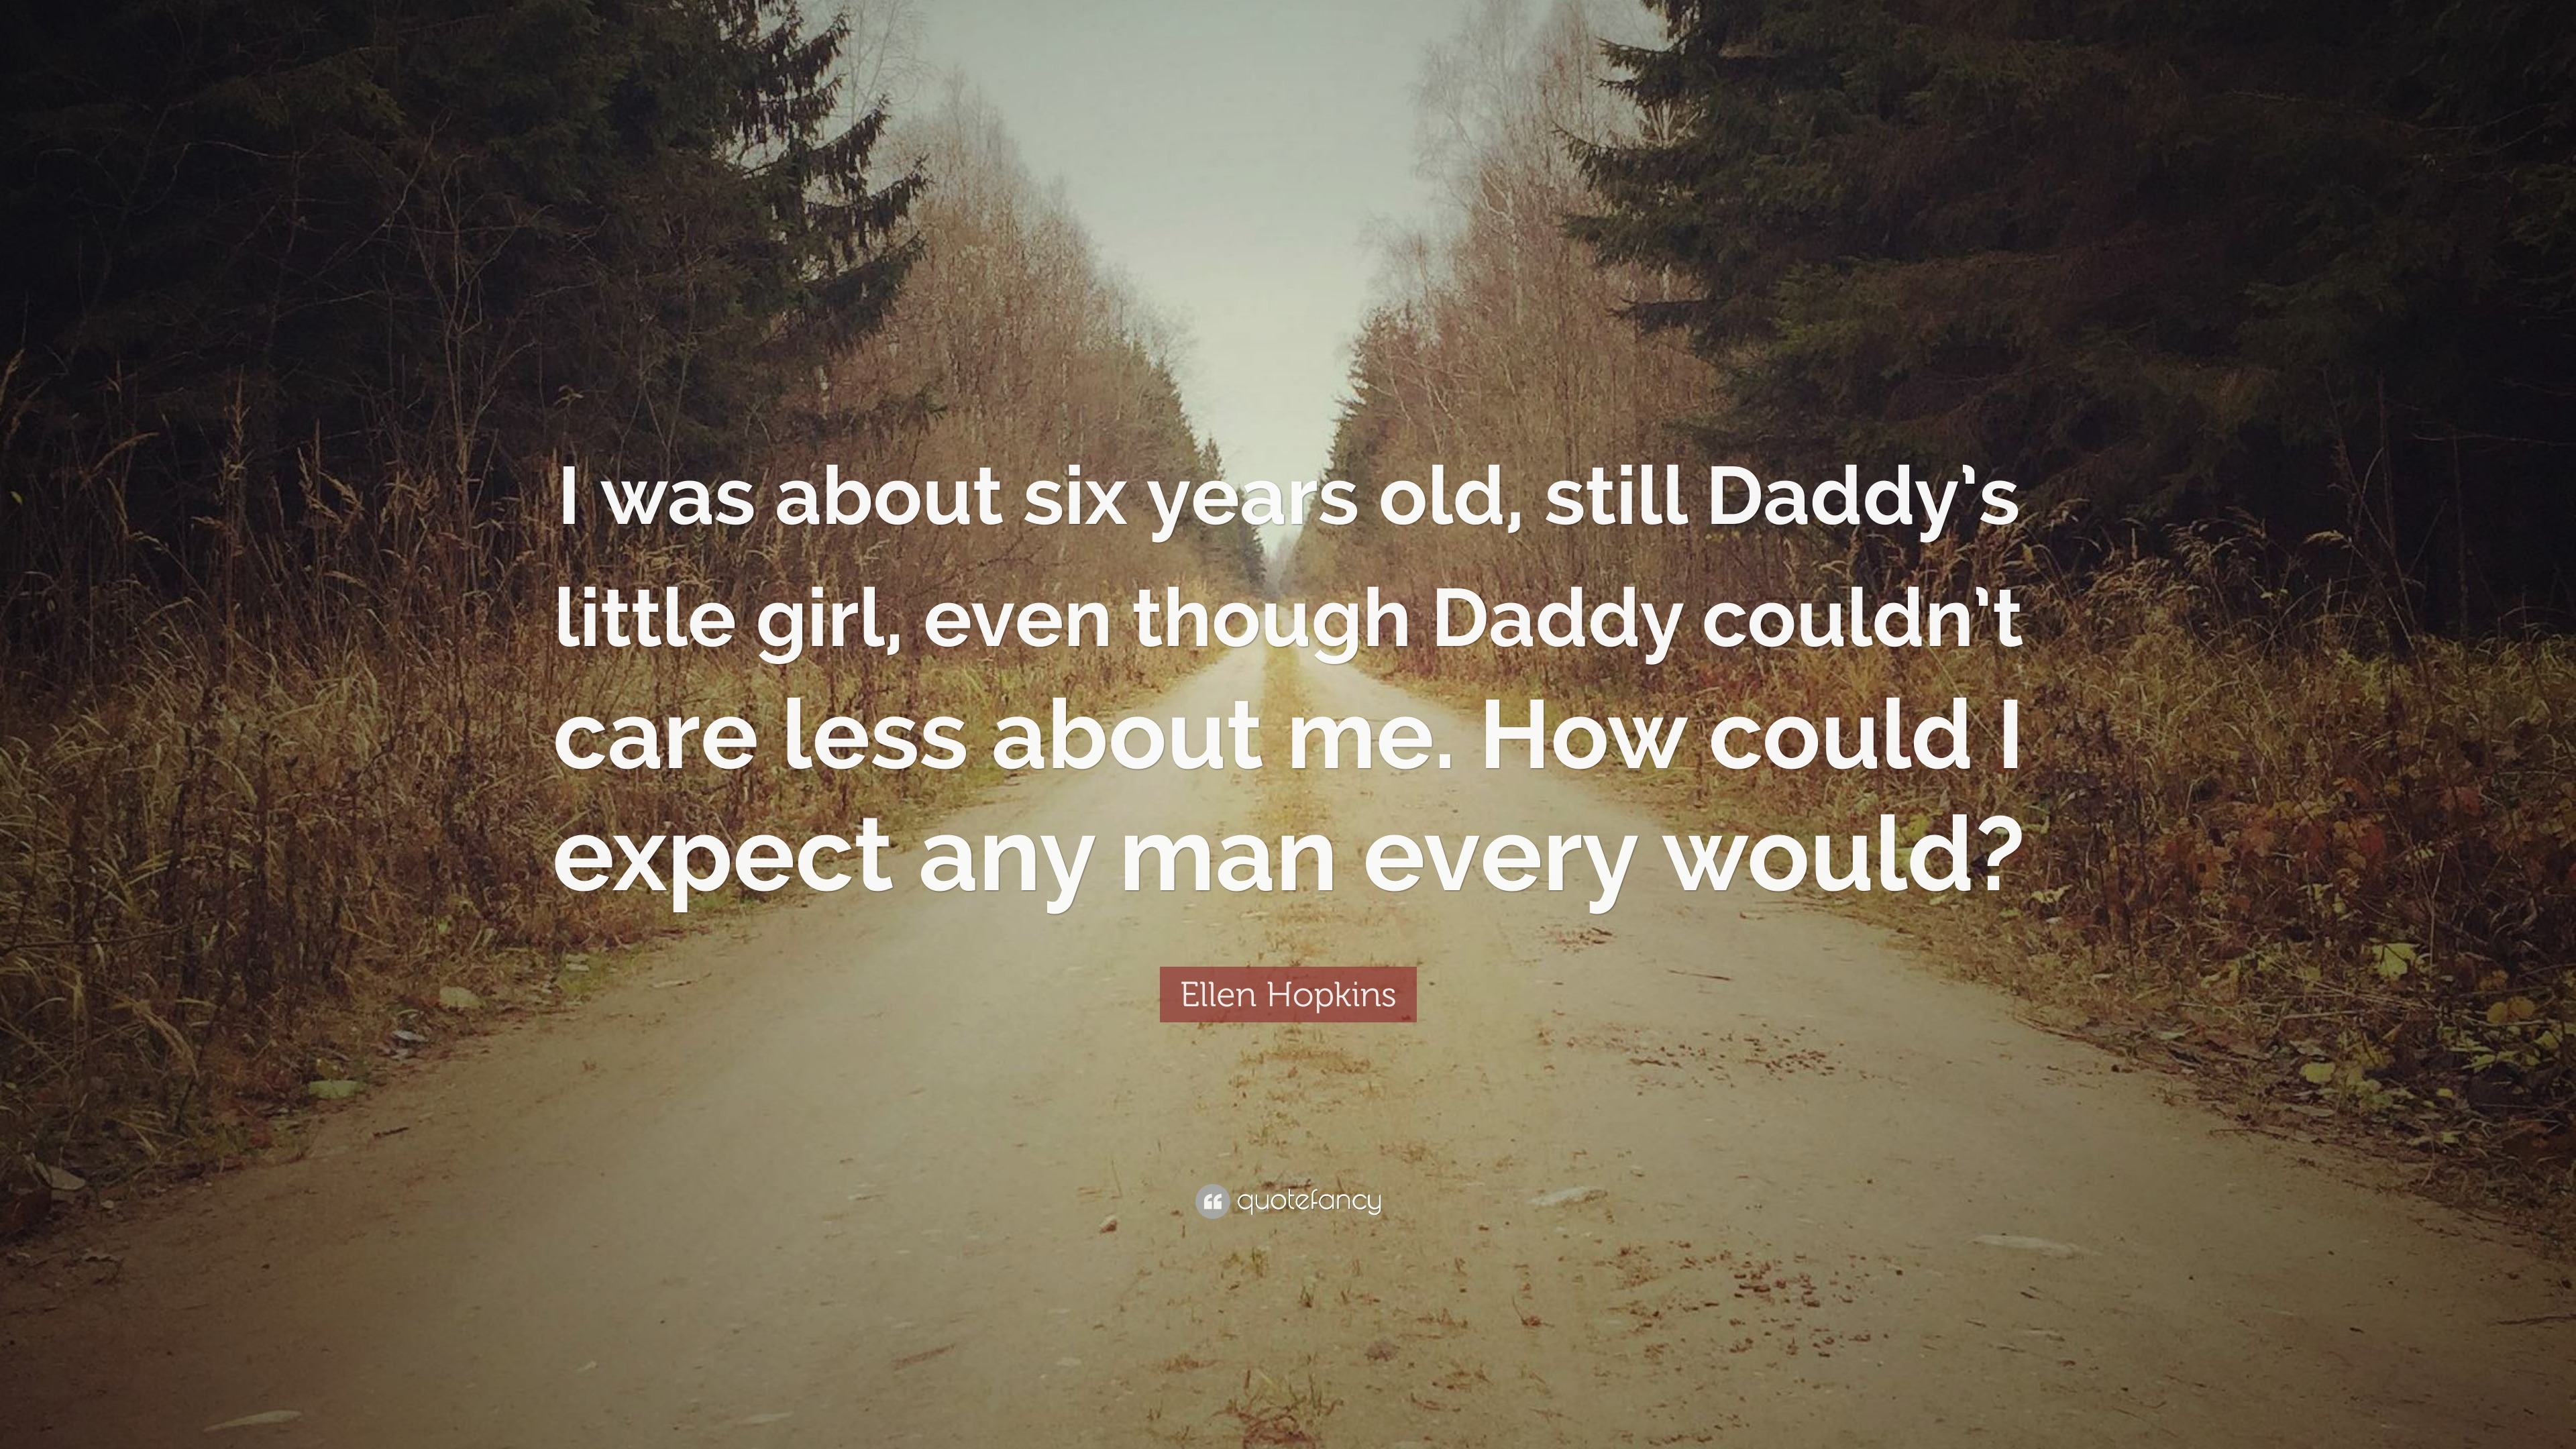 Ellen Hopkins Quote: “I was about six years old, still Daddy's little girl,  even though Daddy couldn't care less about me. How could I expect ...”